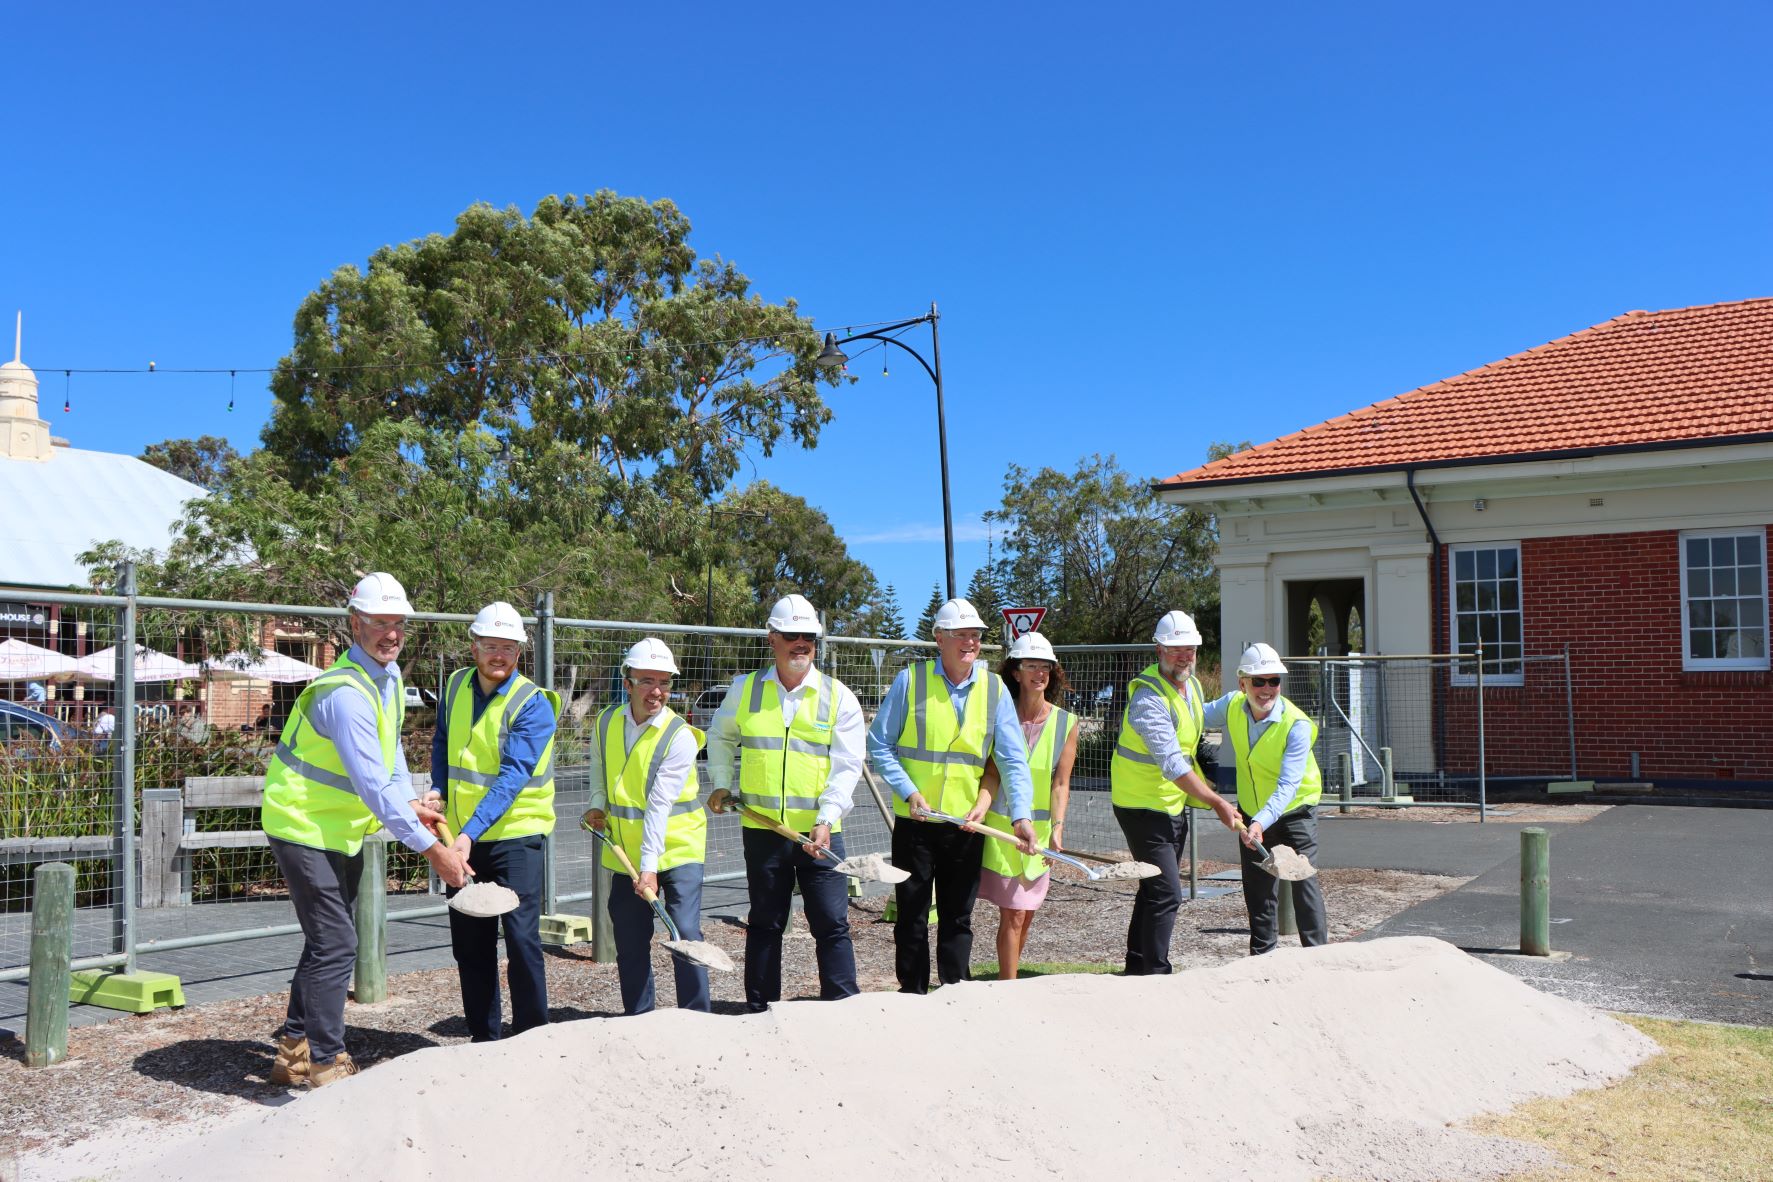 Celebrating the break-ground of the new Busselton Performing Arts and